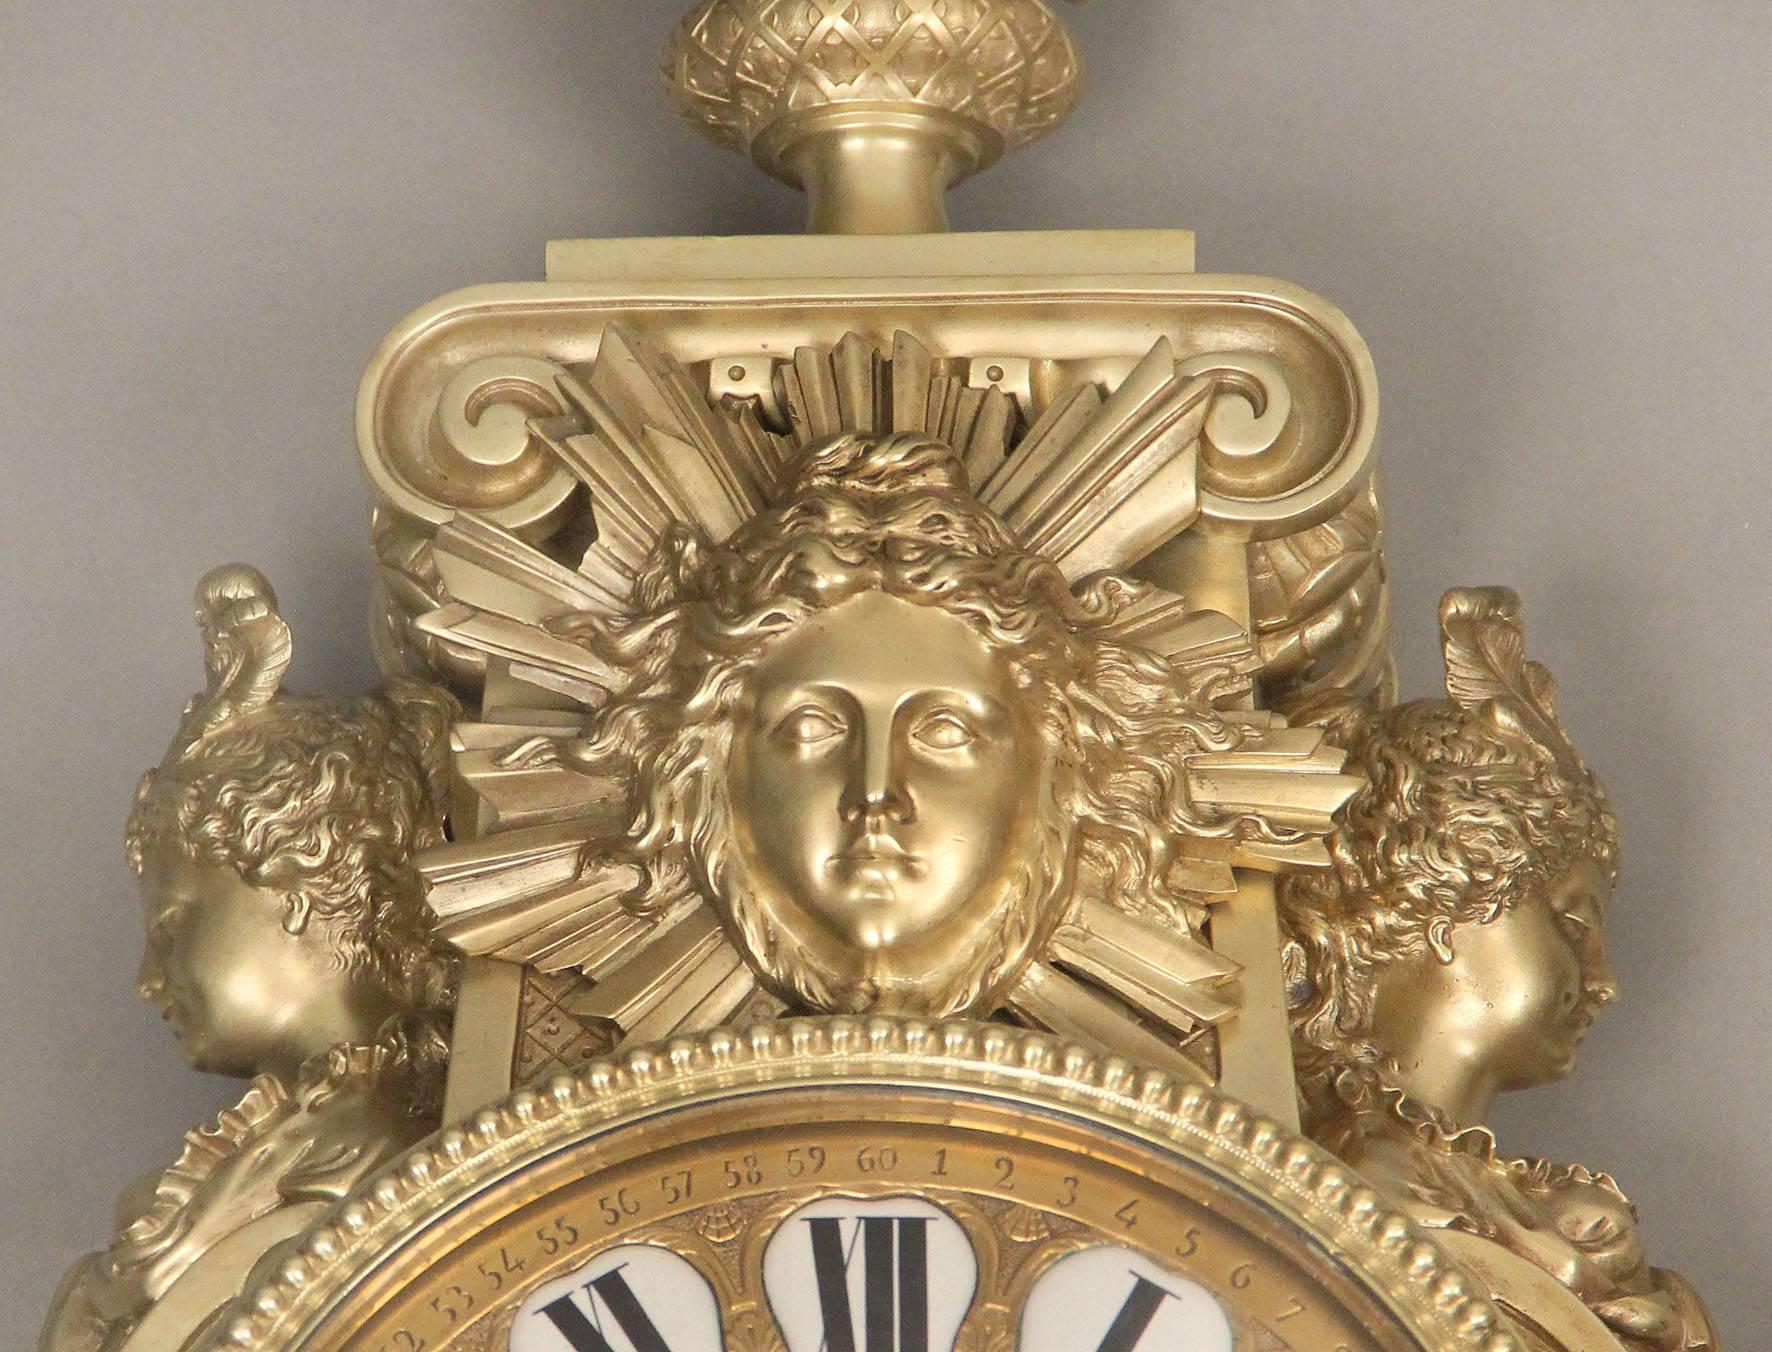 A beautiful and great quality late 19th century gilt bronze cartel clock

The large bronze clock topped by an urn above a large mask of Apollo with a sunburst, two scantily clad women busts on either side, centred with a finely detailed clock dial